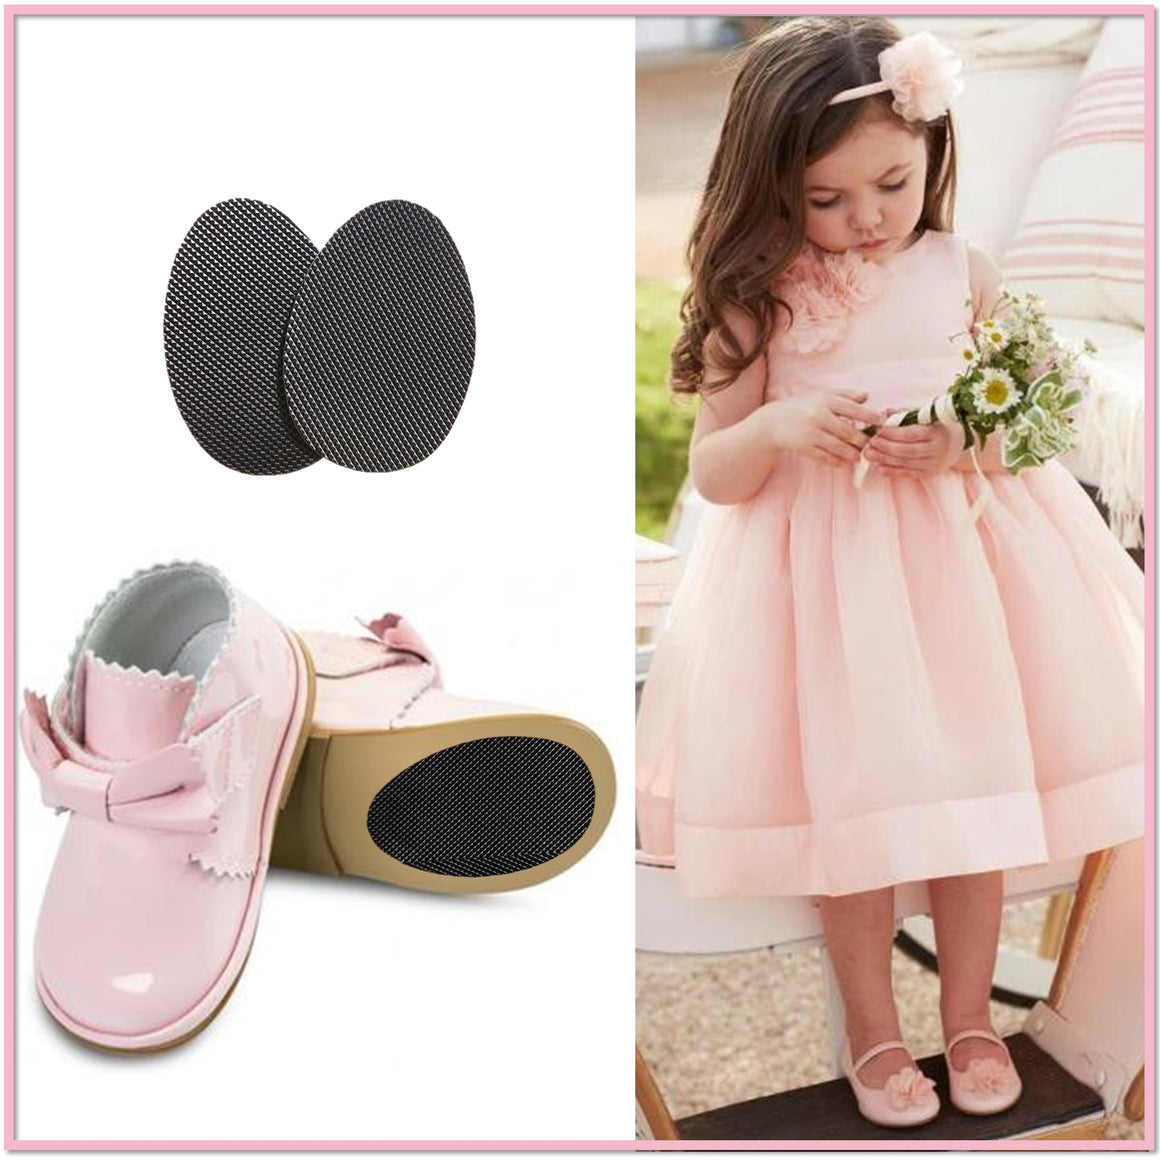 Sole Savers Juniors (3 Pair)- Sole Protectors for Kids, Juniors, and Small Adult Shoes - Boottique